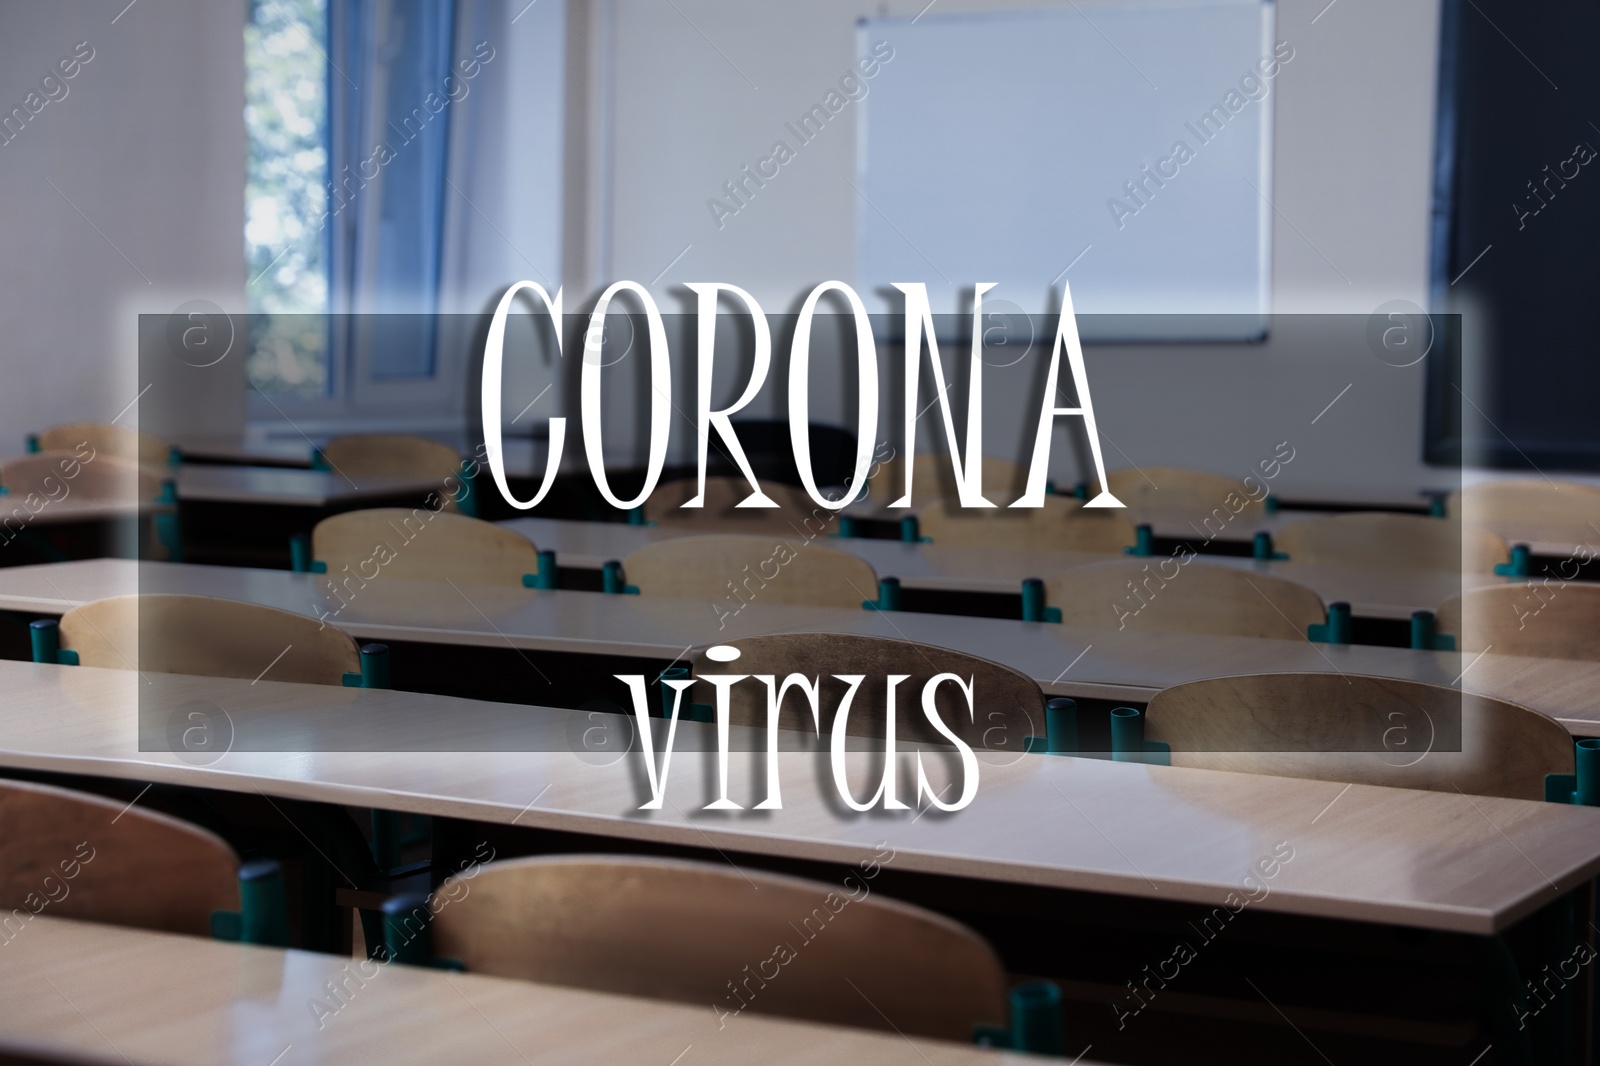 Image of View of empty classroom and text CORONA VIRUS. School closings during COVID-19 pandemic